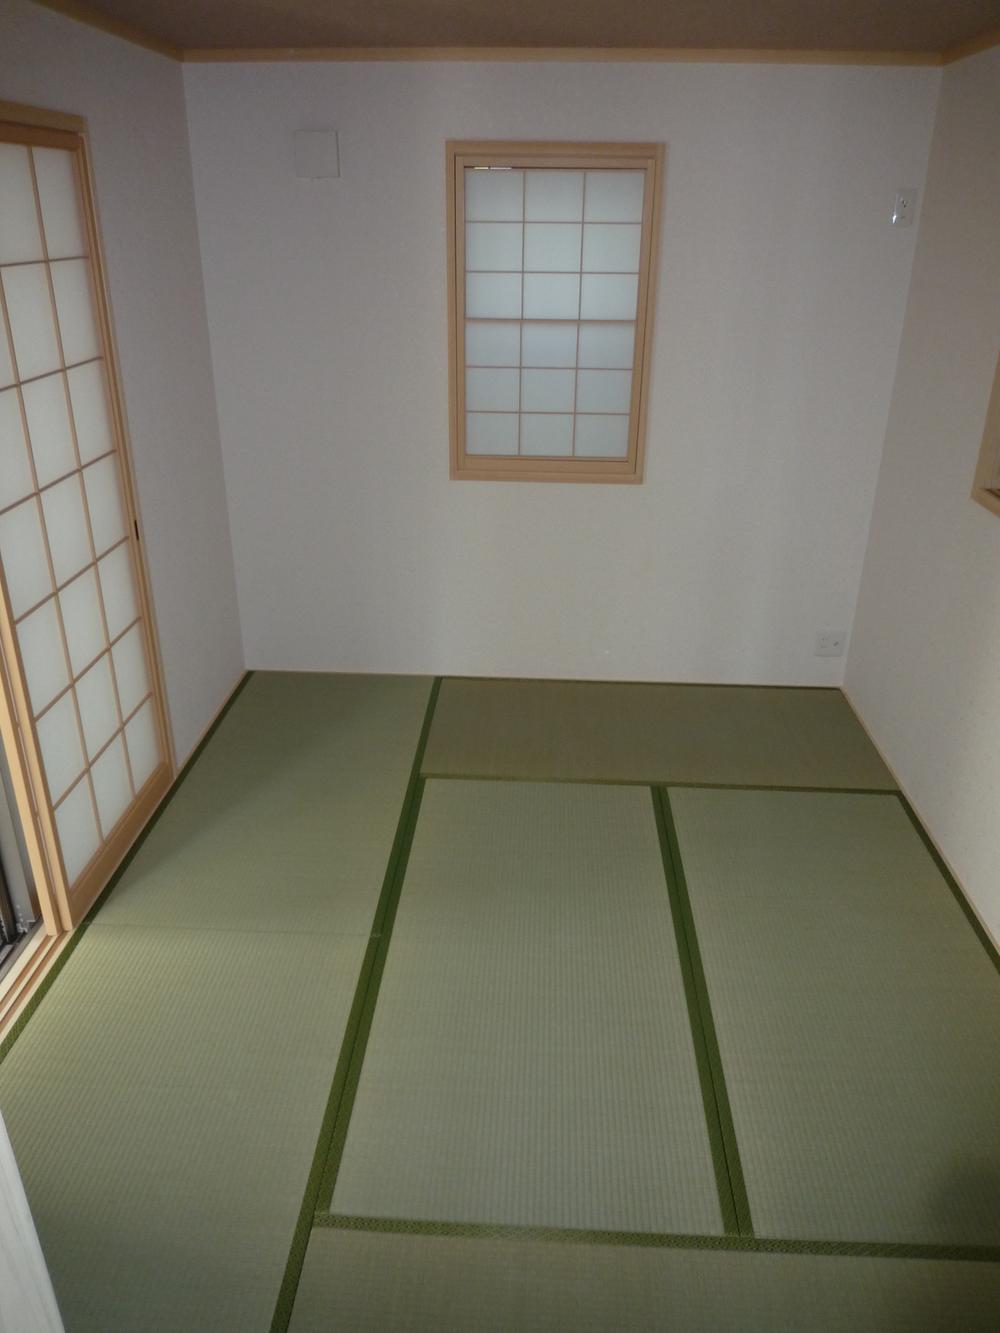 Other introspection. 1st floorese-style room.